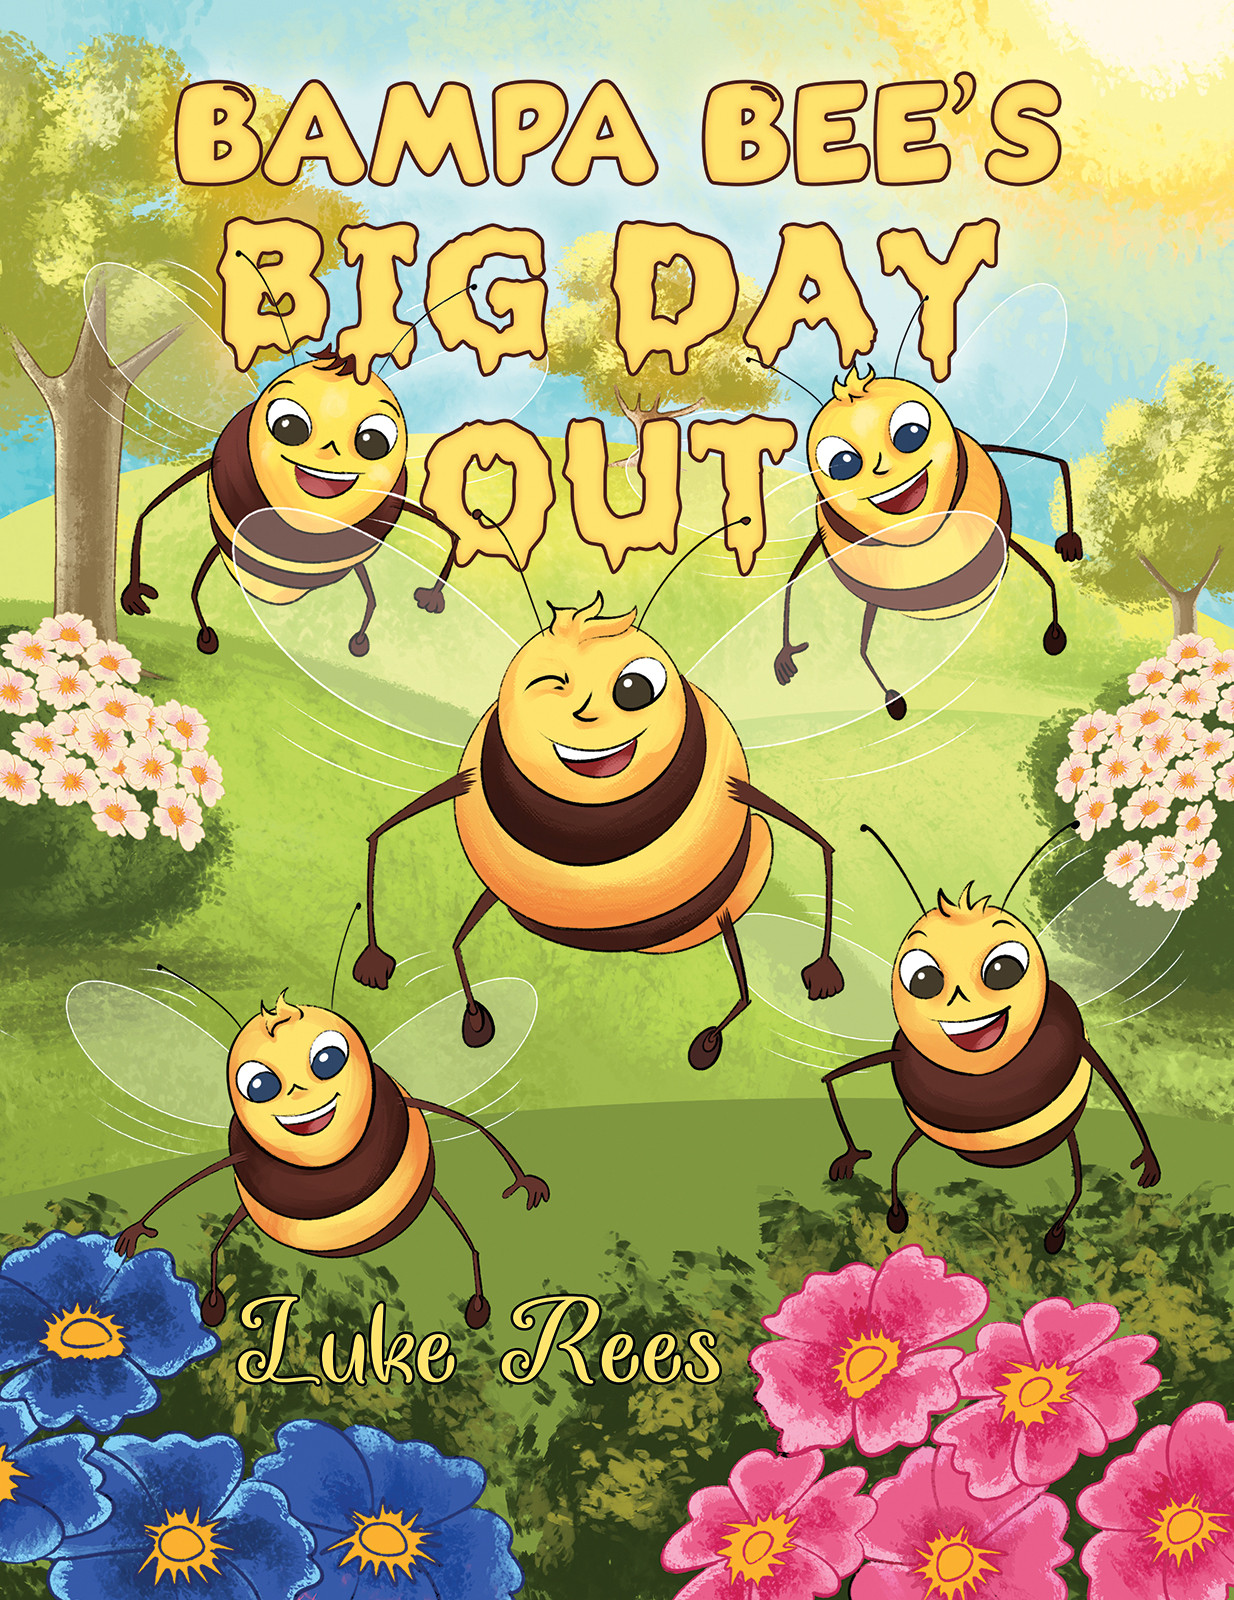 Bampa Bee's Big Day Out